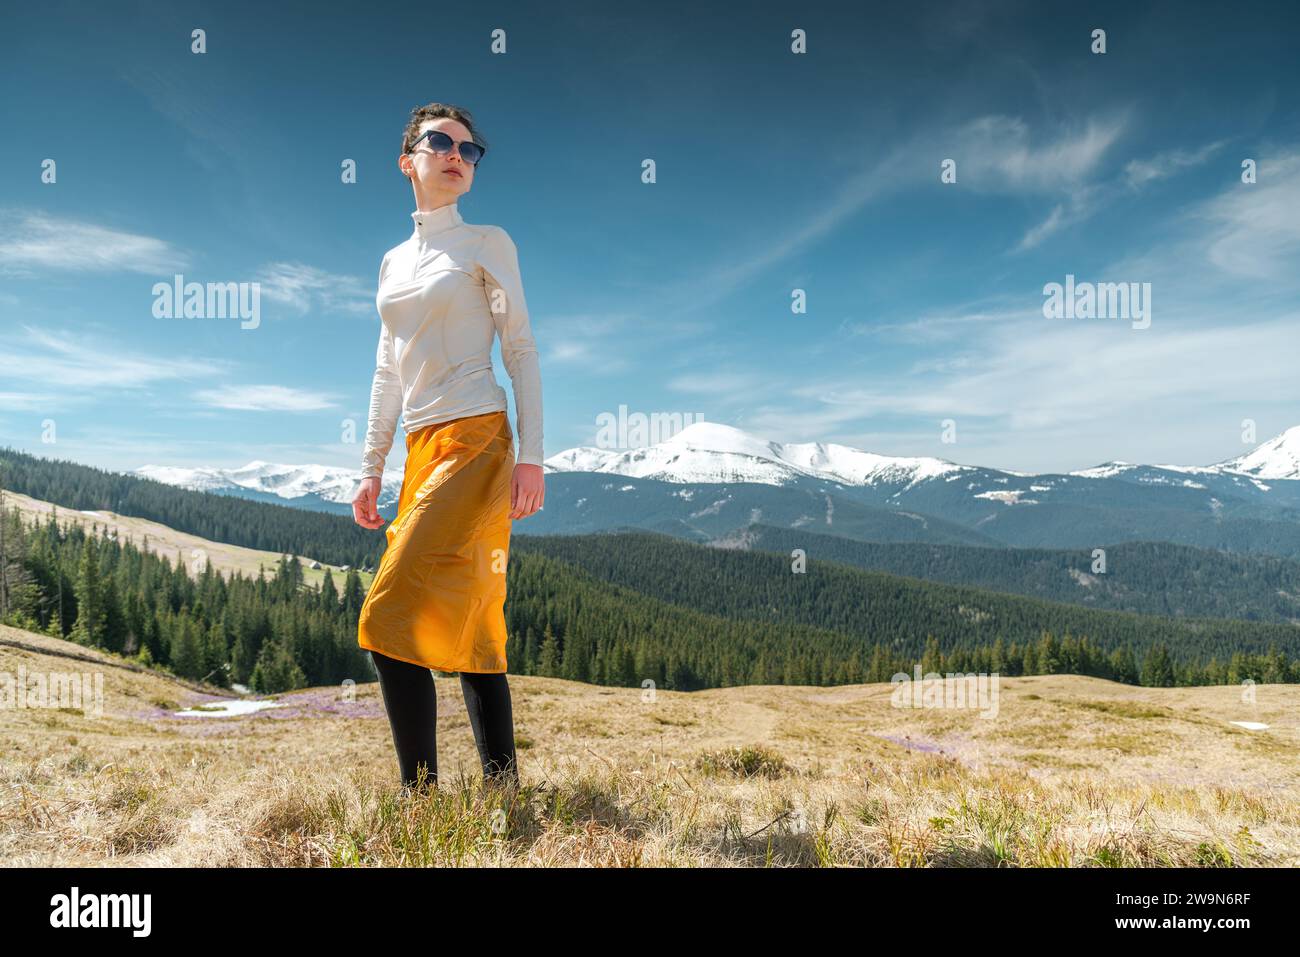 Young Woman on a Hiking Trip in the Mountains Enjoying the View Stock Photo